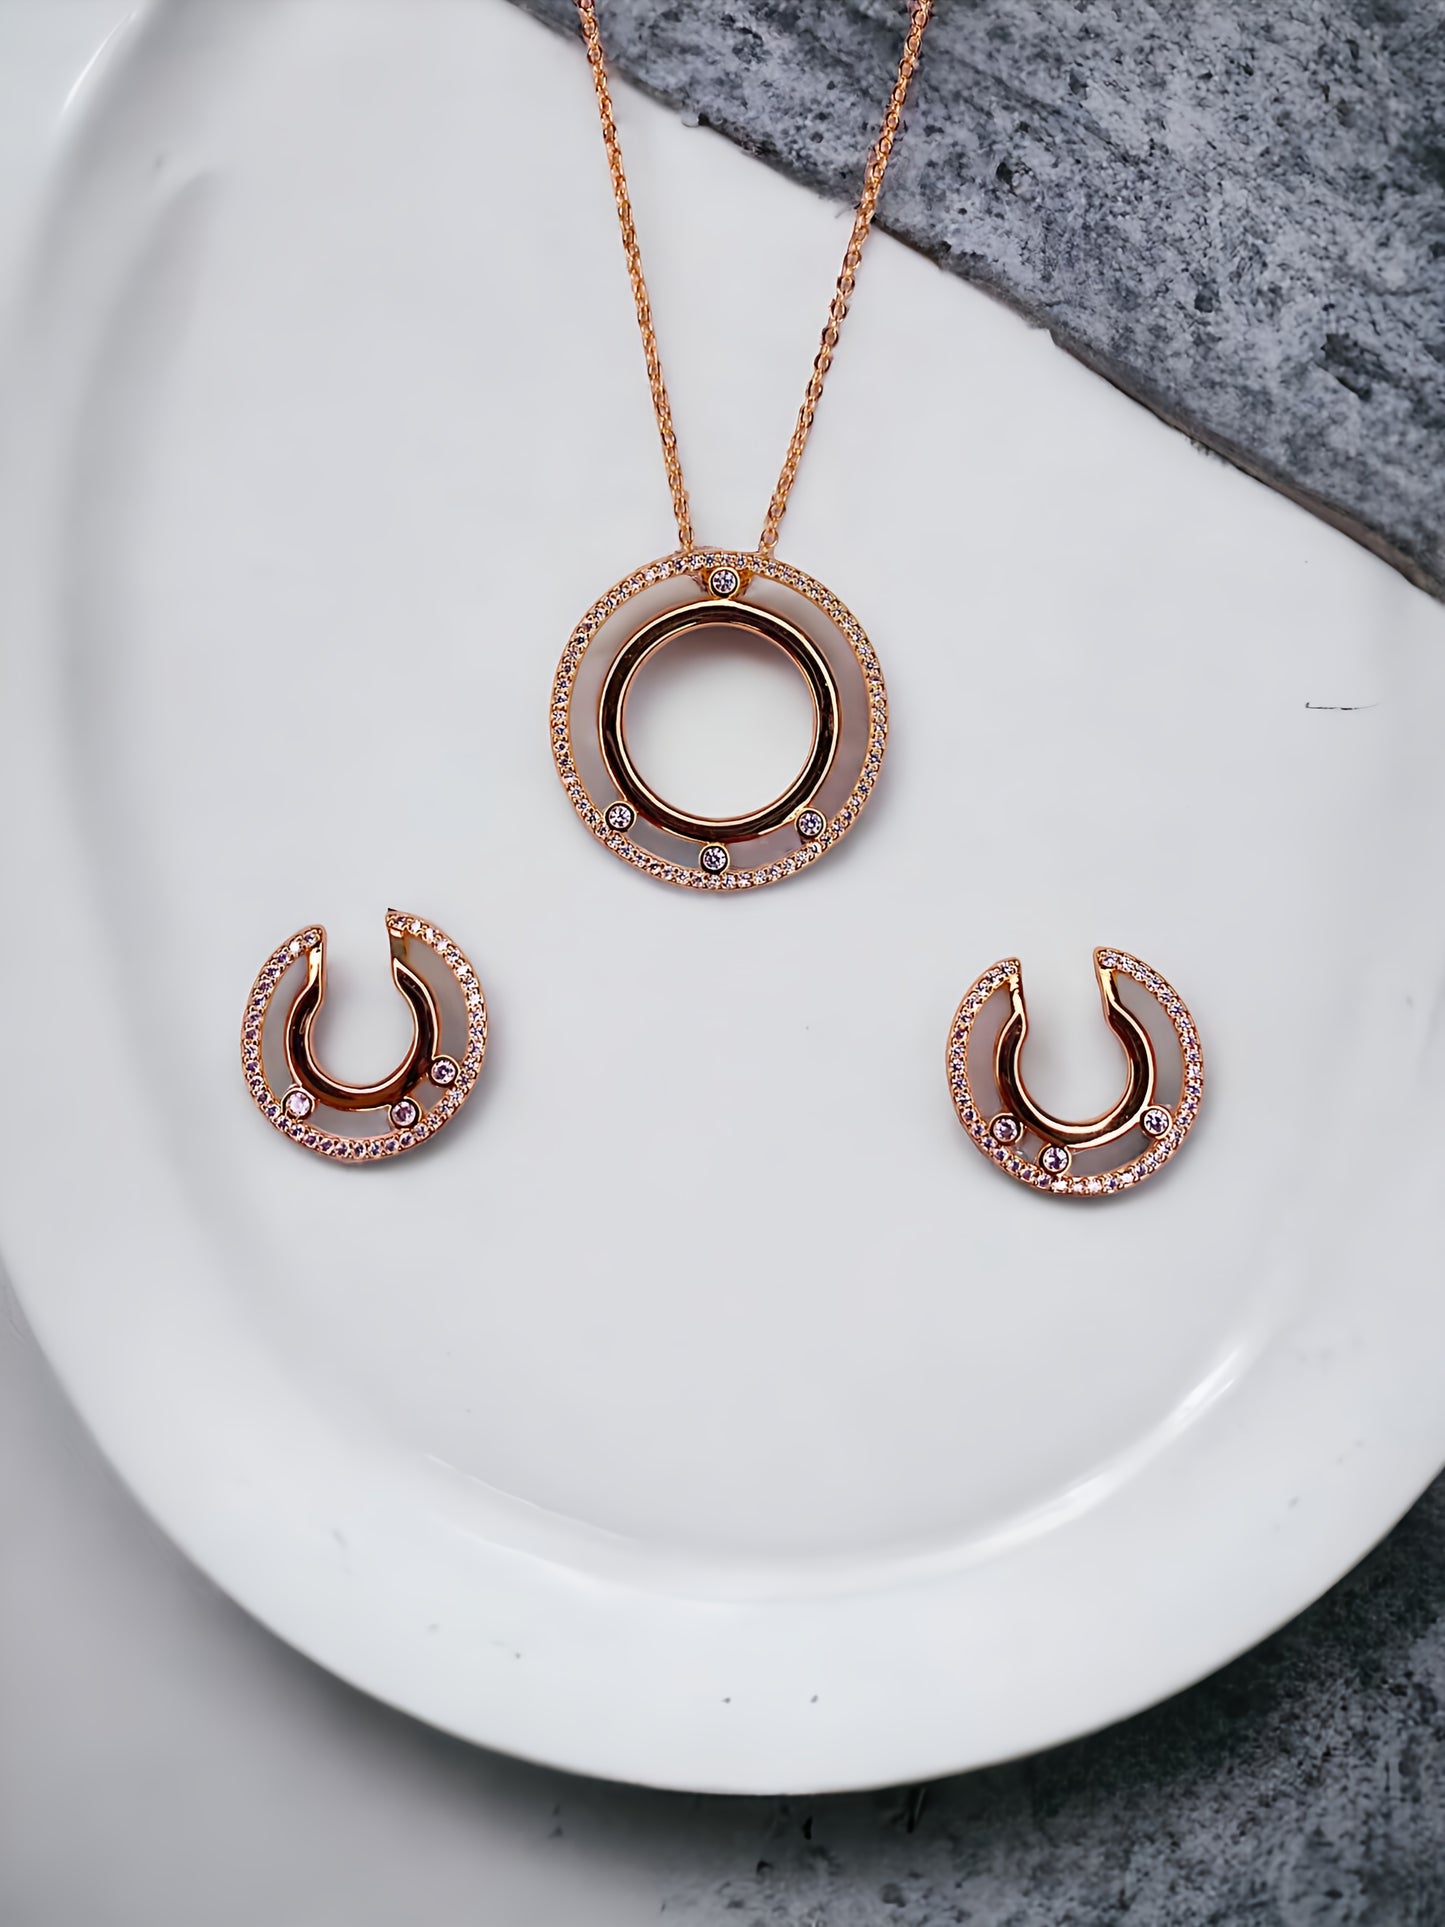 Gold Plated Circle Pendant Set with Stones